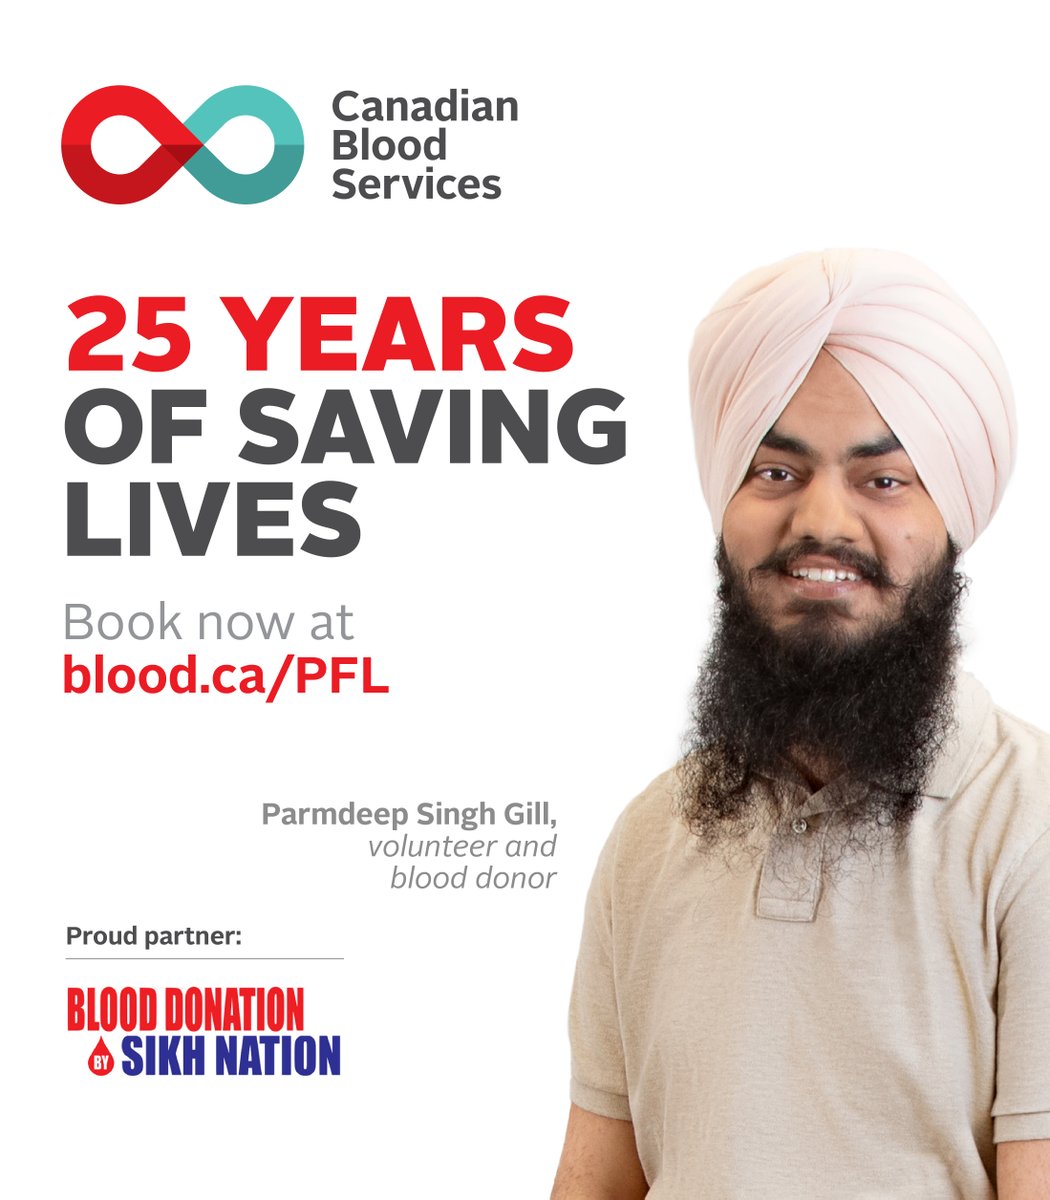 Sikh Nation is one of the most active Partners for Life and the largest contributor of blood and plasma donations. This year, we ask new donors to join their team, donate for the first time and make all the difference in their community. @campaign1984 #CanadasLifeline